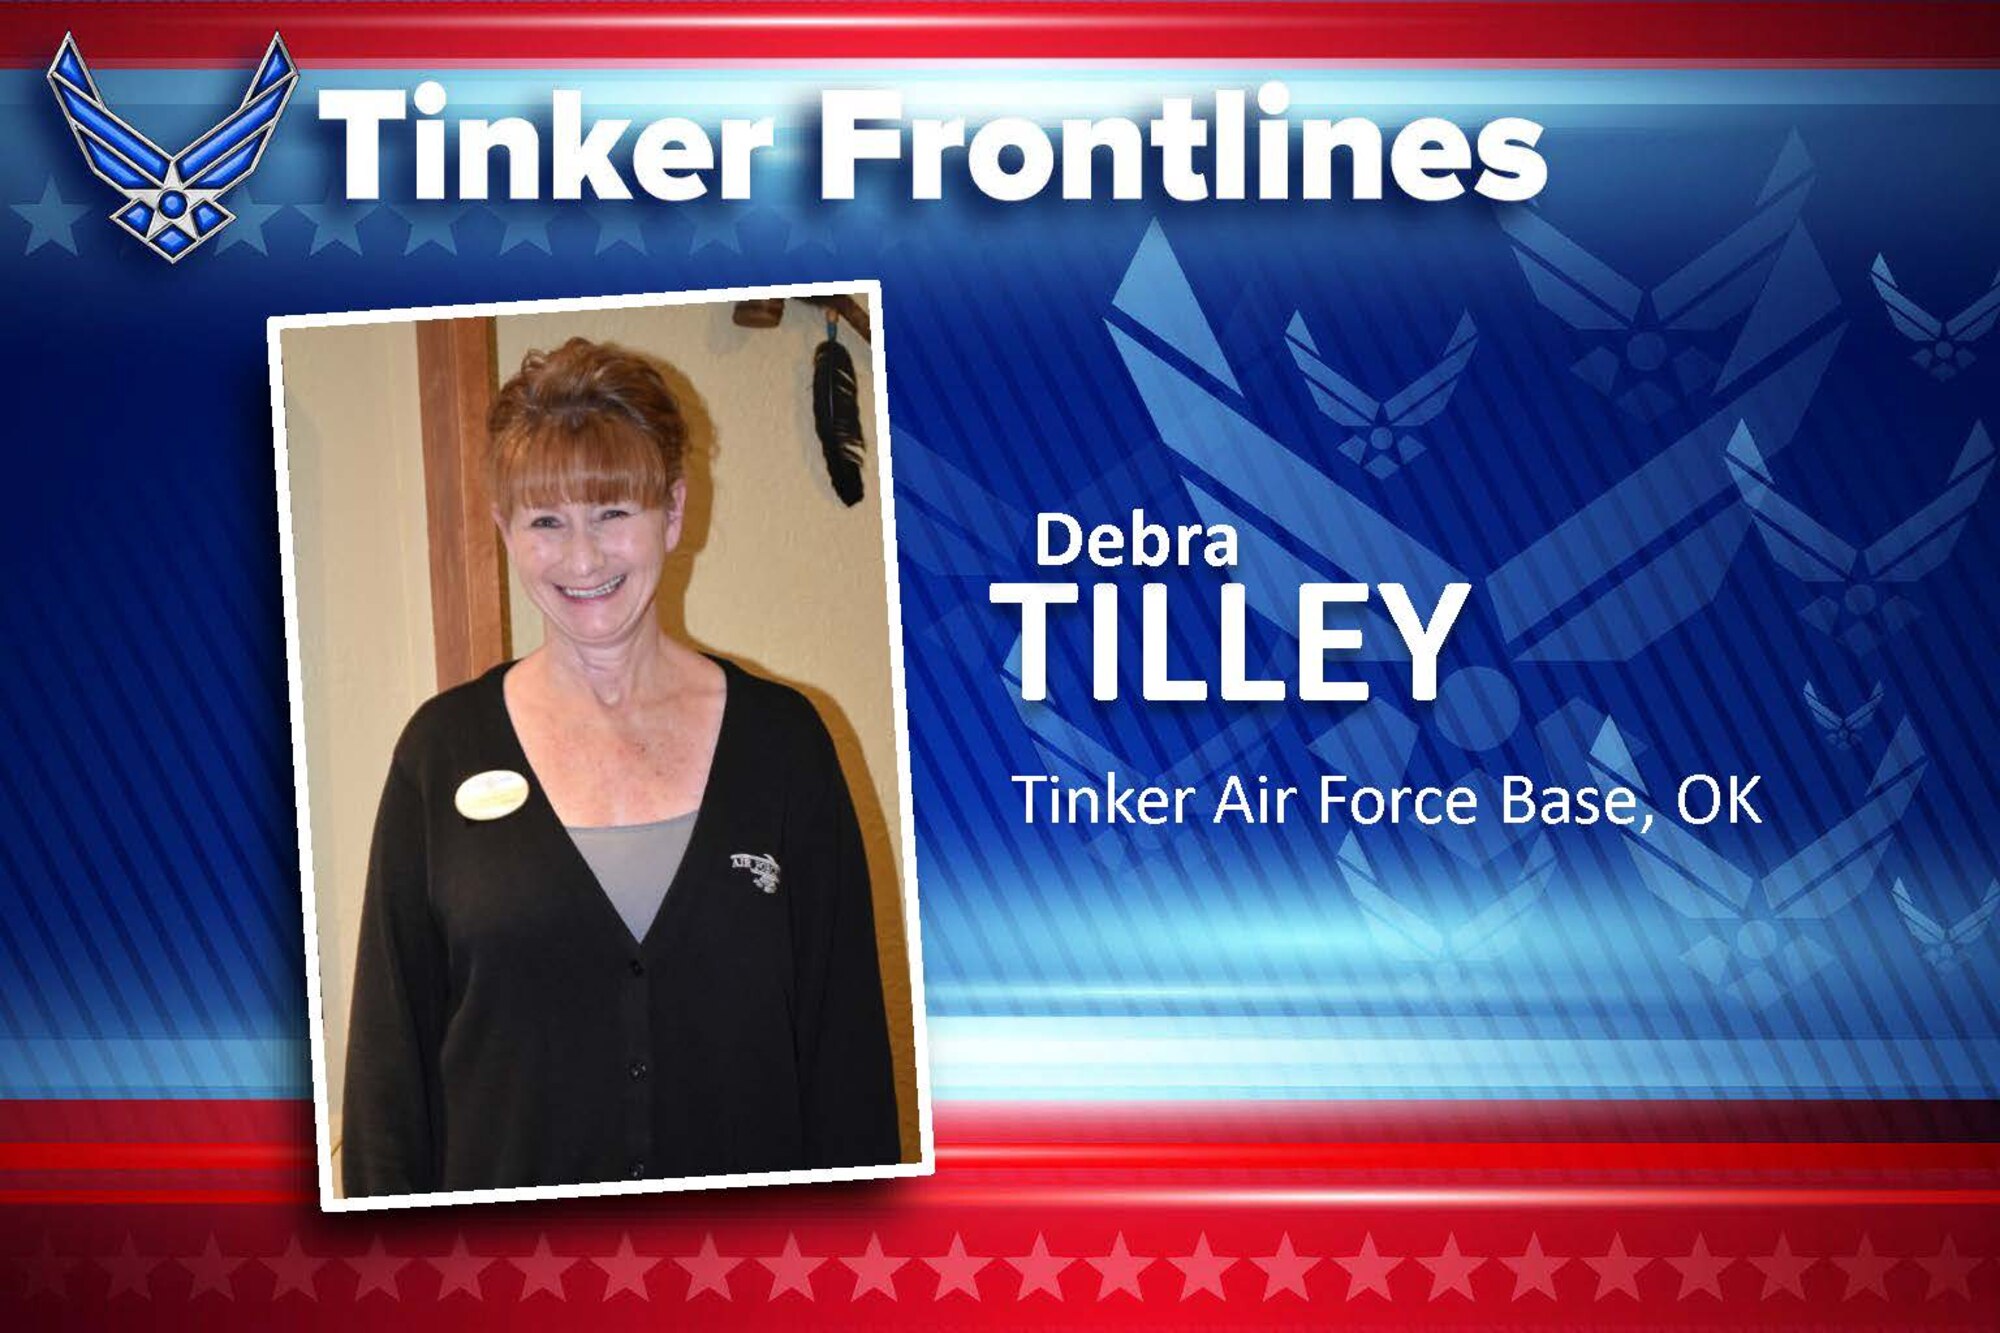 Graphic of Tinker Frontlines with photo of smiling woman